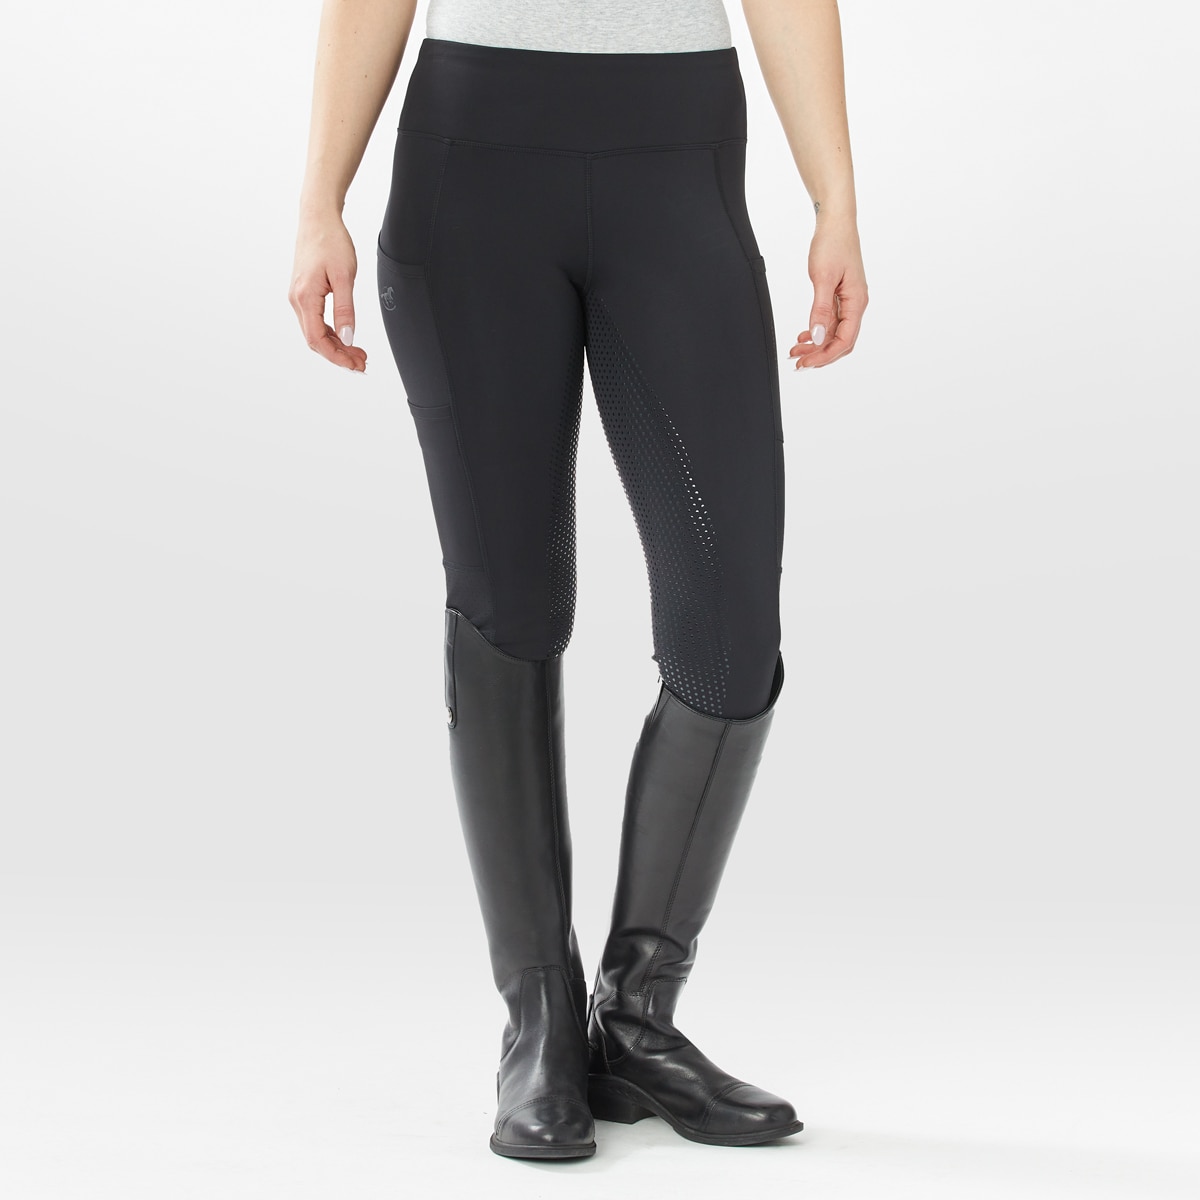 SmartPak - Just in! Our Piper Tights 2.0 take the perfect